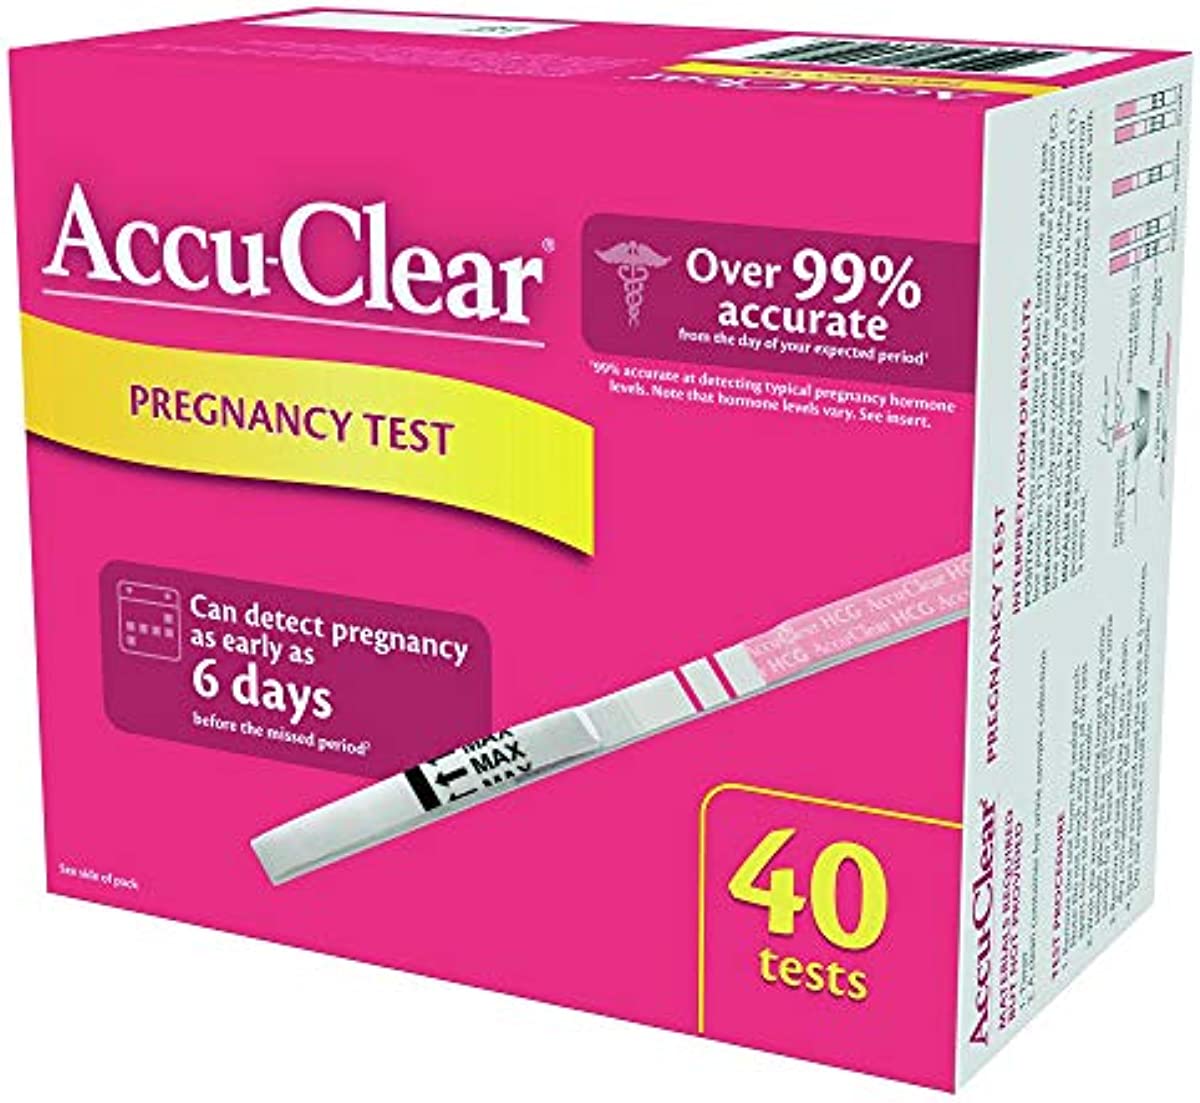 Accu-Clear Pregnancy Test Strips Over 99{f2156fc9aee13aafc51e60d98538426cabe8b876b587ae74cce47b2ee407224f} Accurate HCG Tests, 40 Count